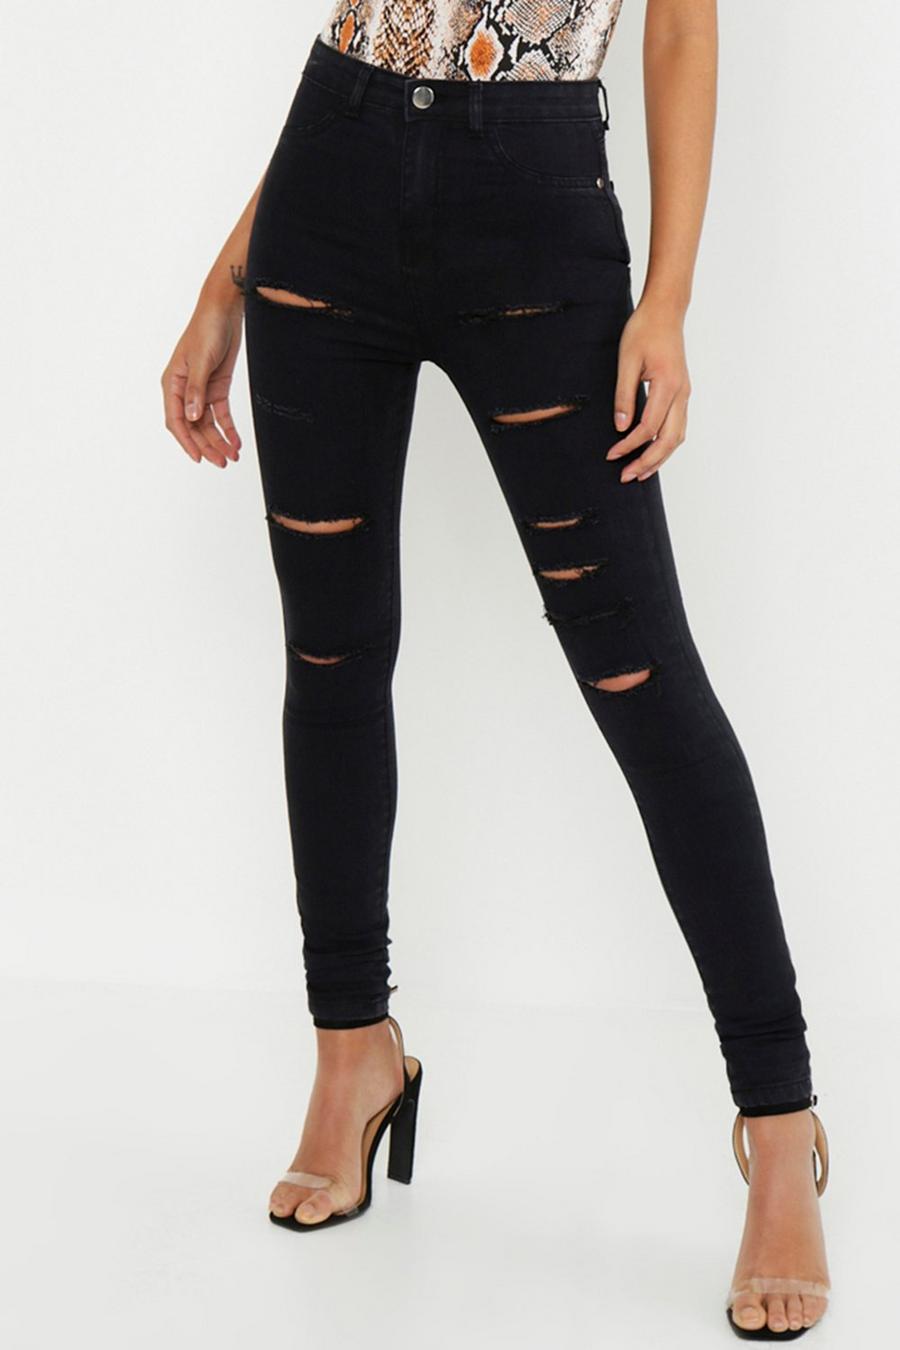 Tall Clothing Sale | Cheap Tall Clothes | boohoo UK